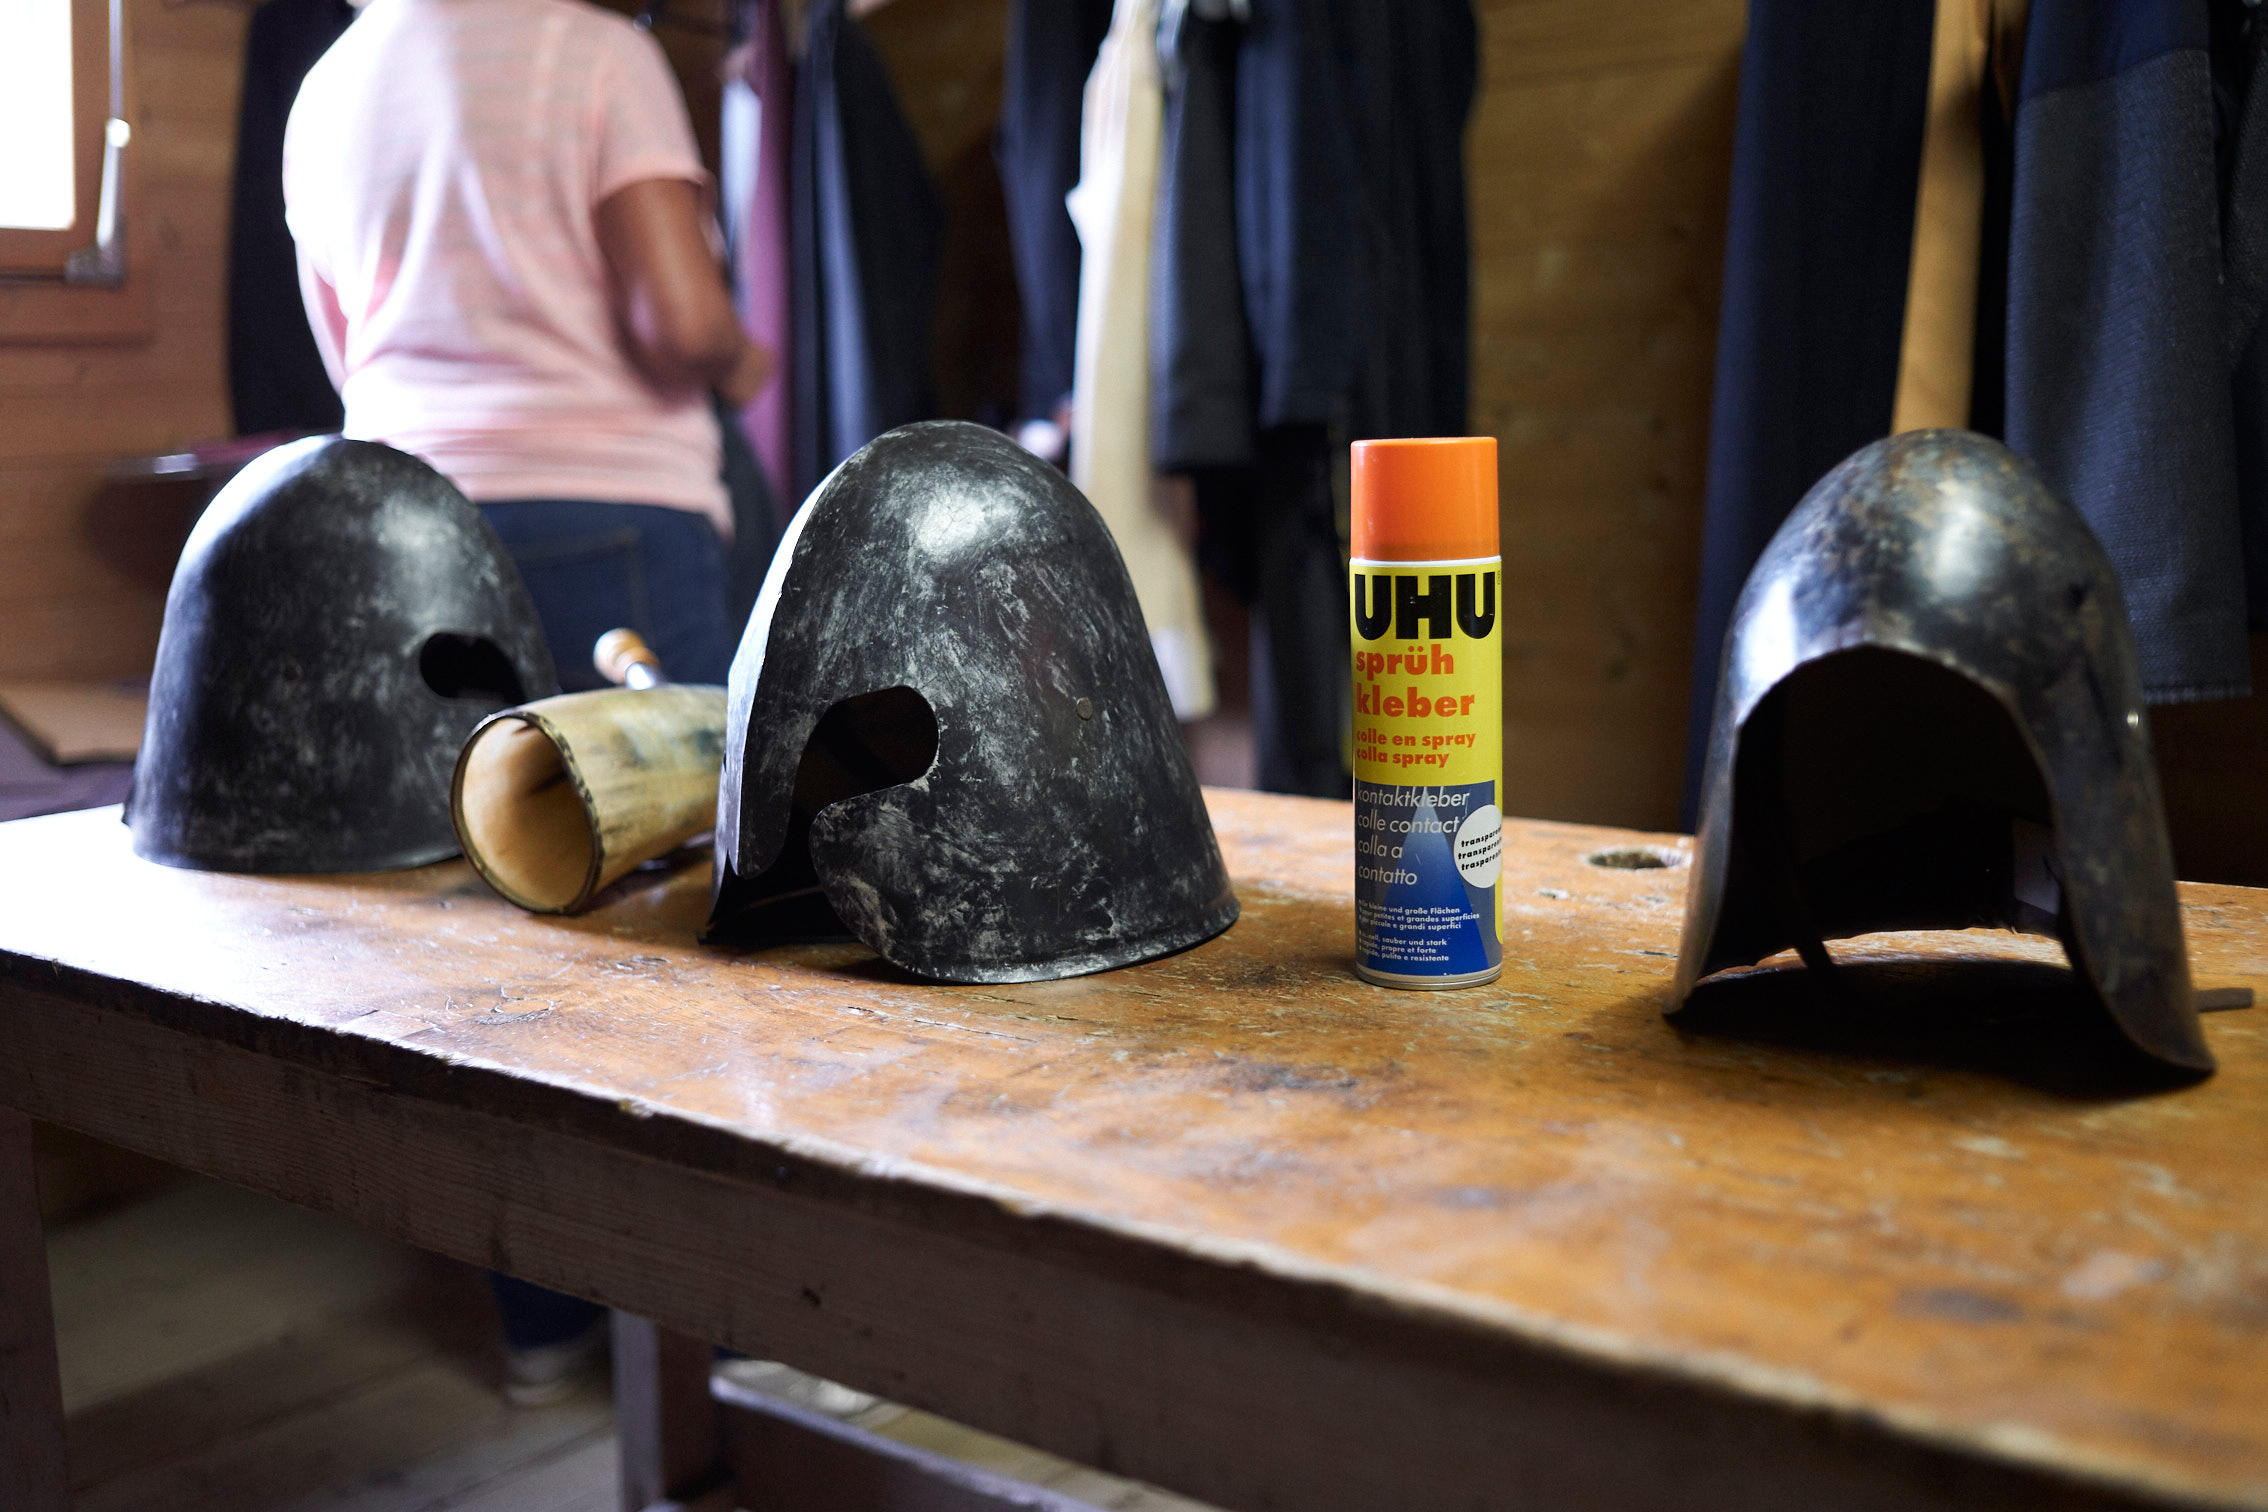 Knight s helmets on a table with a can of glue